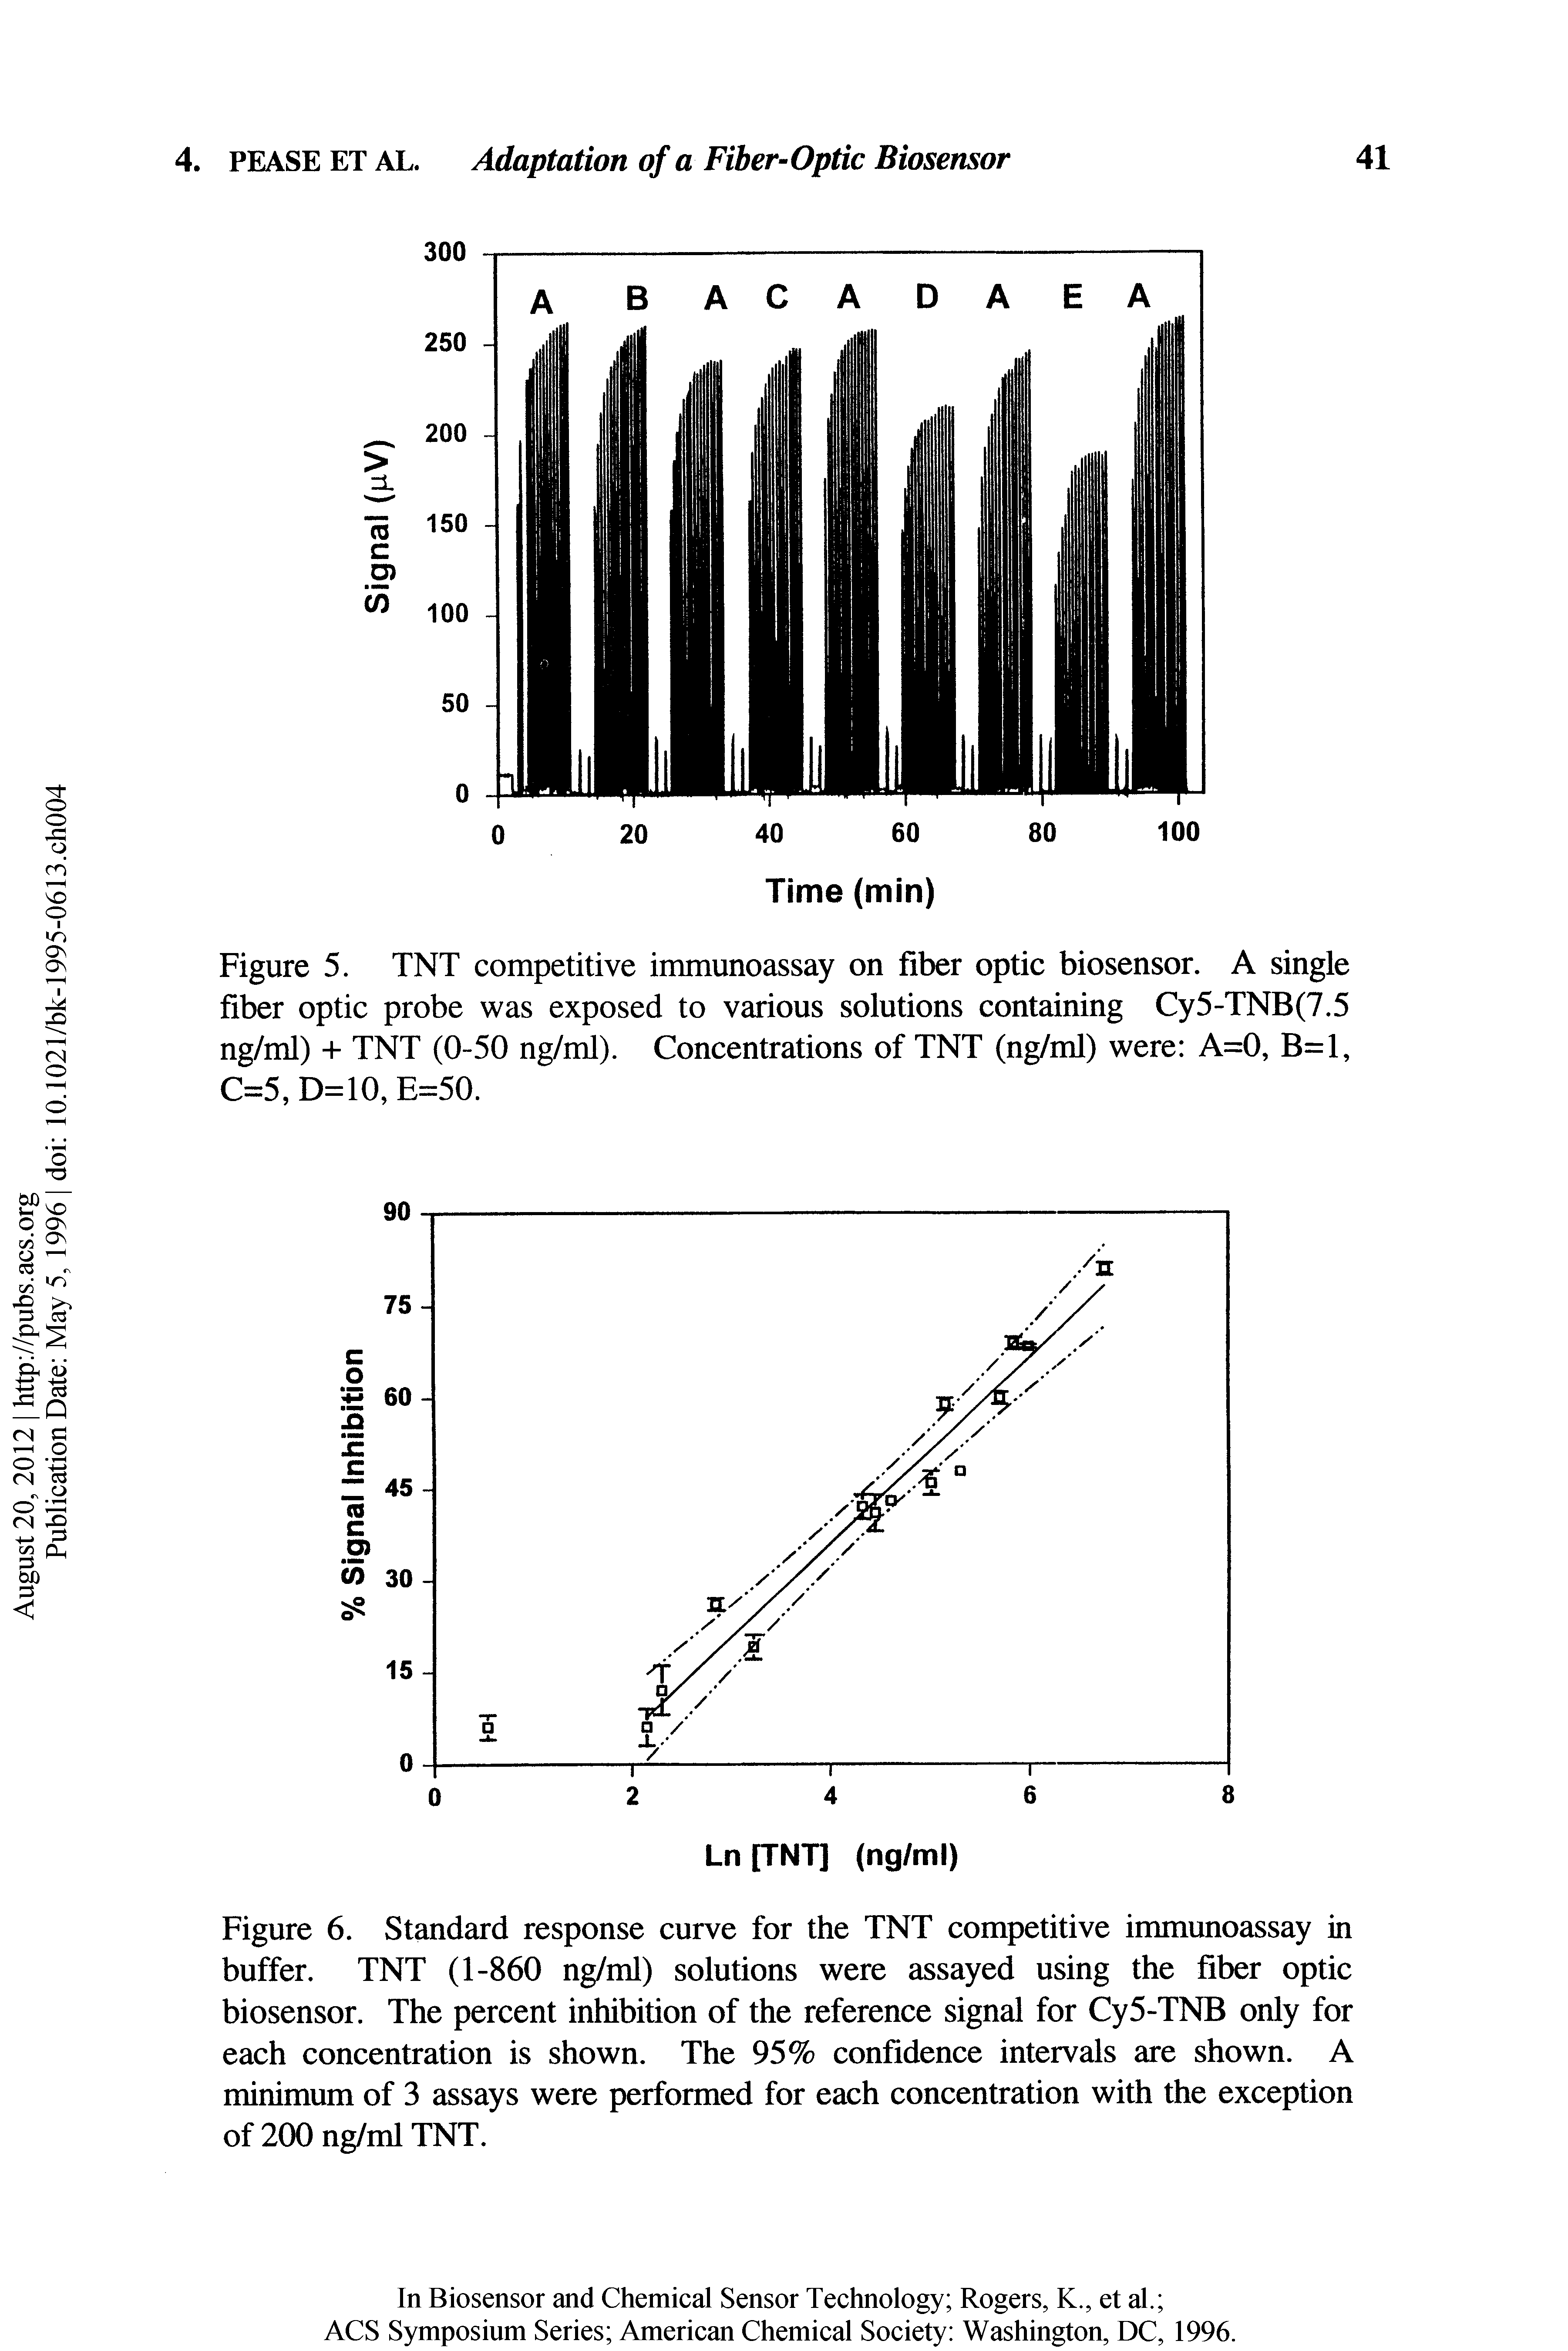 Figure 5. TNT competitive immunoassay on fiber optic biosensor. A single fiber optic probe was exposed to various solutions containing Cy5-TNB(7.5 ng/ml) + TNT (0-50 ng/ml). Concentrations of TNT (ng/ml) were A=0, B=l, C=5,D=10, E=50.